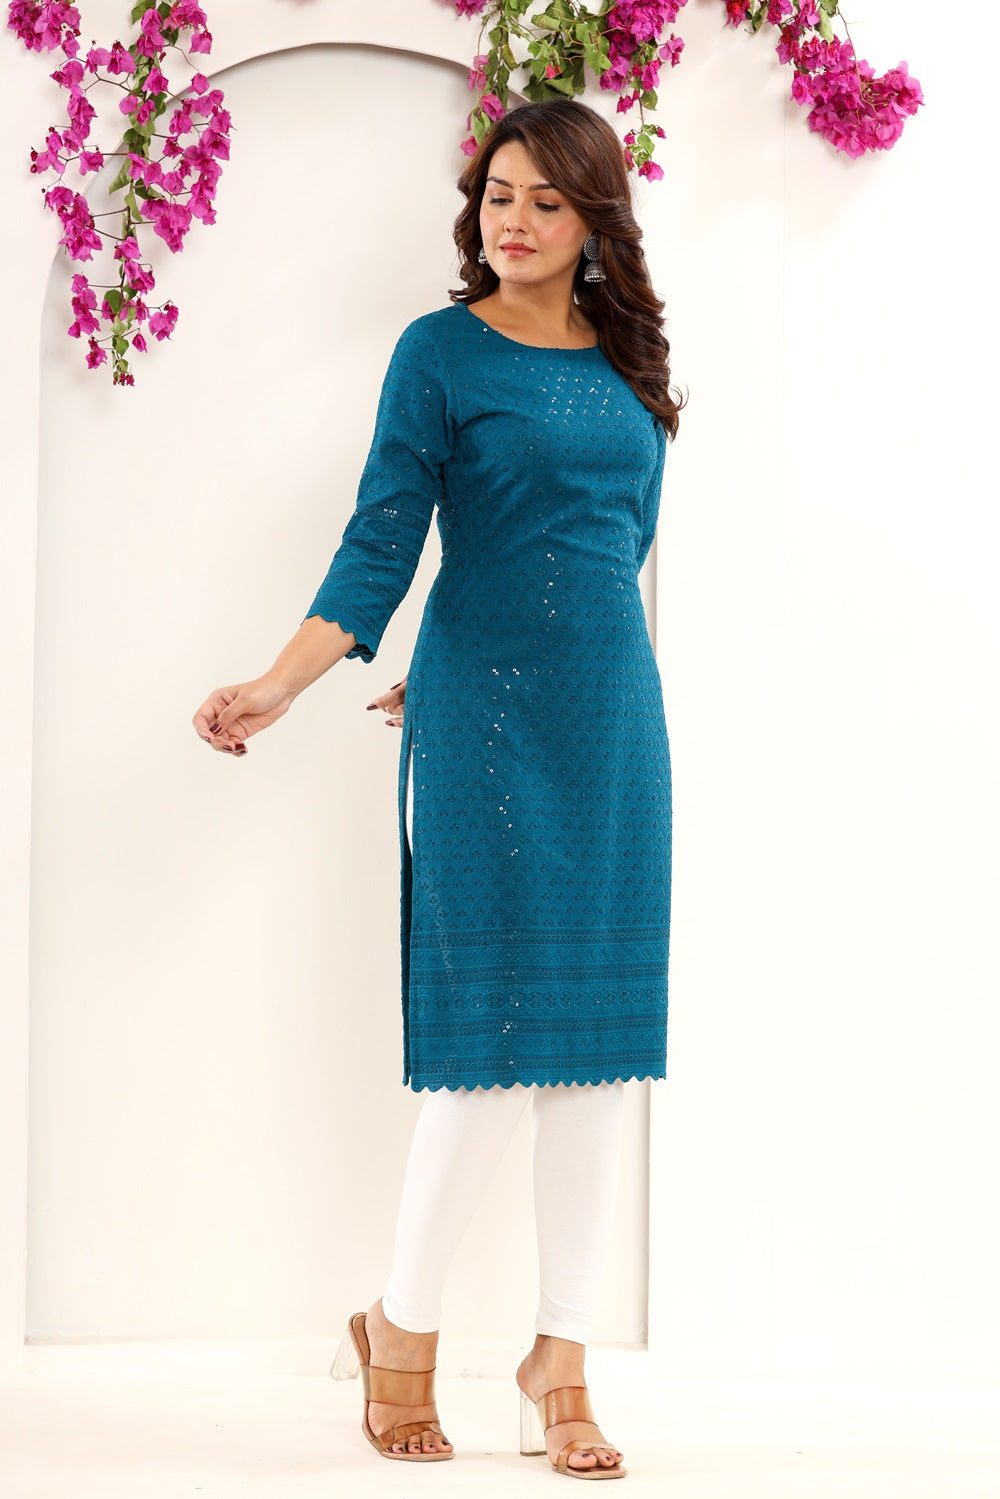 Indian Kurti Styles and Designs Every Woman Should Know – Yufta Store